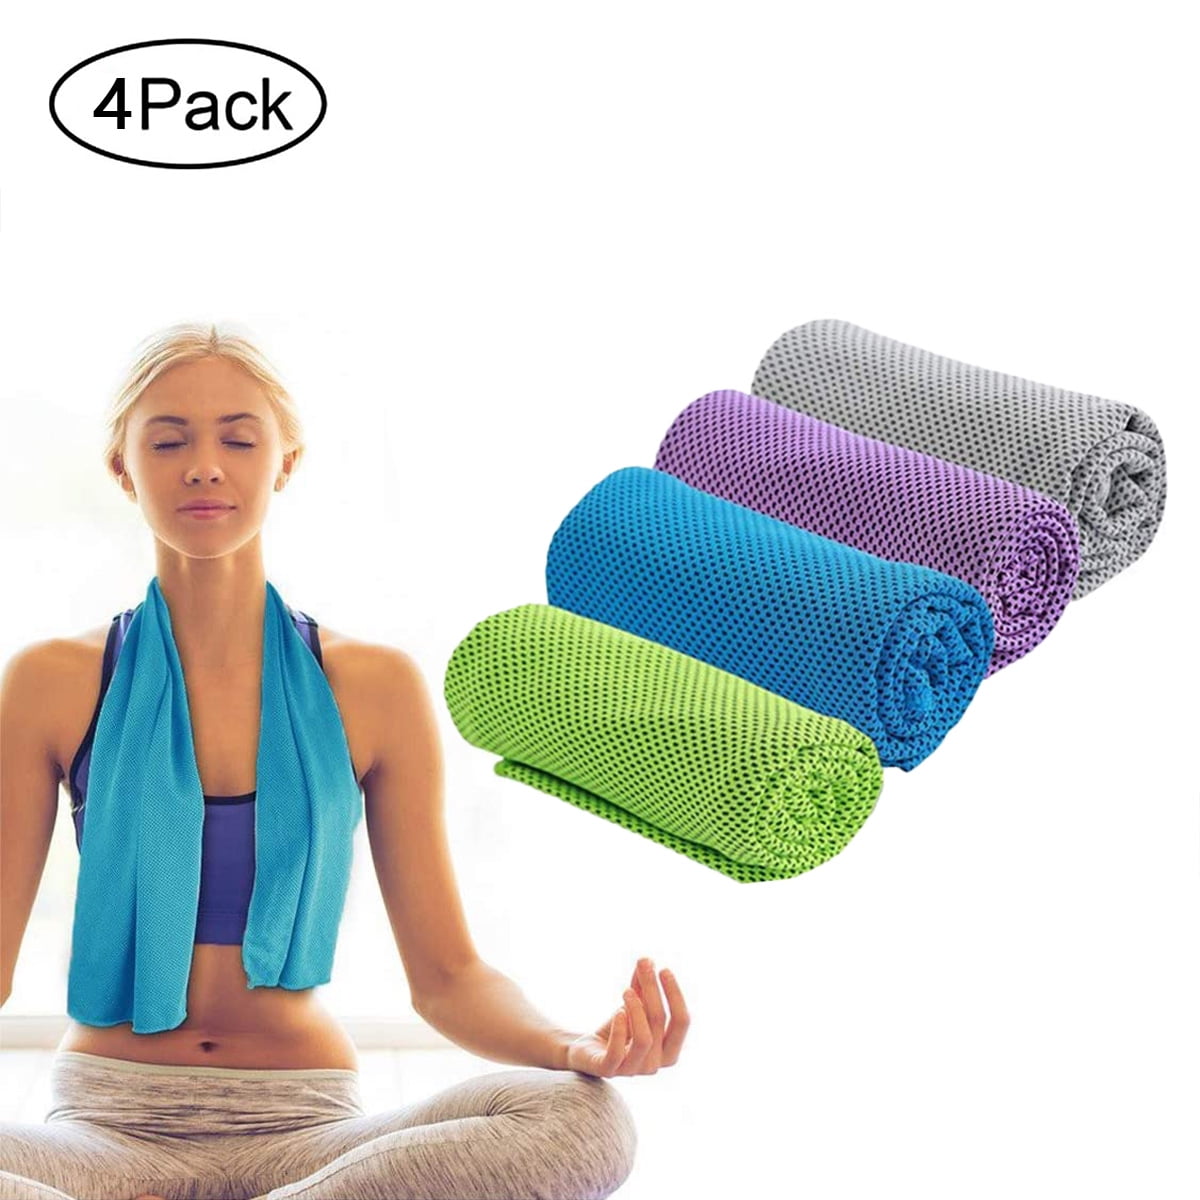 LLCP Cold Feeling Sports Towel Sweat-Absorbing Ice Towel Gym Men And Women Running Wrist Speed Cooling Towel,Light Breathable Multi-Functional Quick Dry Towel,Blue